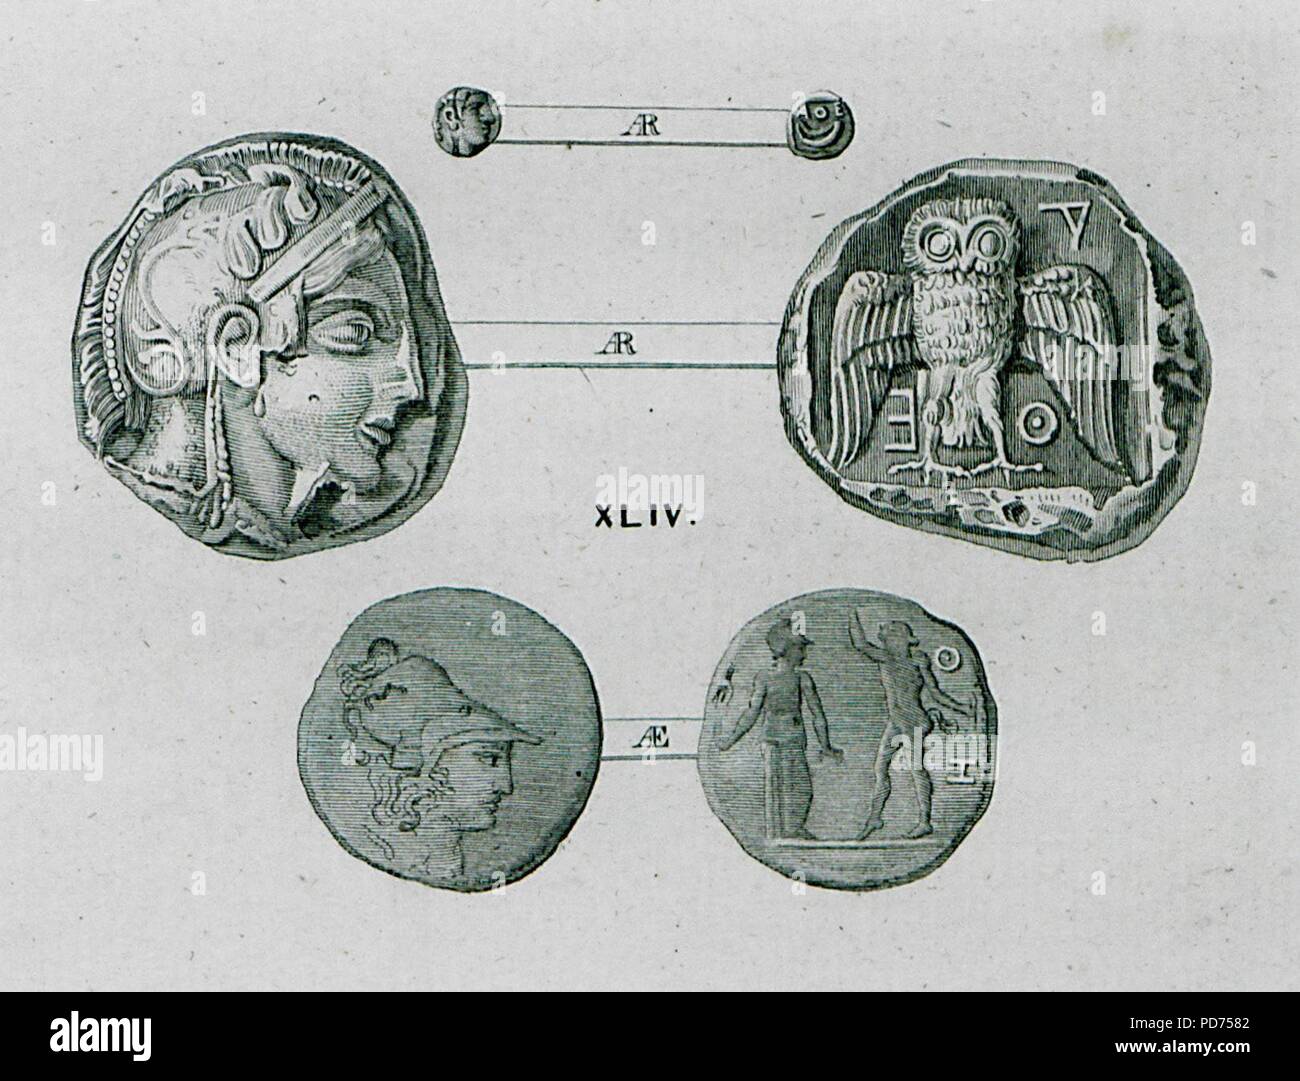 Ancient coins of Athens 2 Silver tetradrachm Obv Athena Rev Athene noctua 3 Bronze coin of Roman era Obv Athena and Saty - Peter Oluf Brøndsted - 1830. Stock Photo